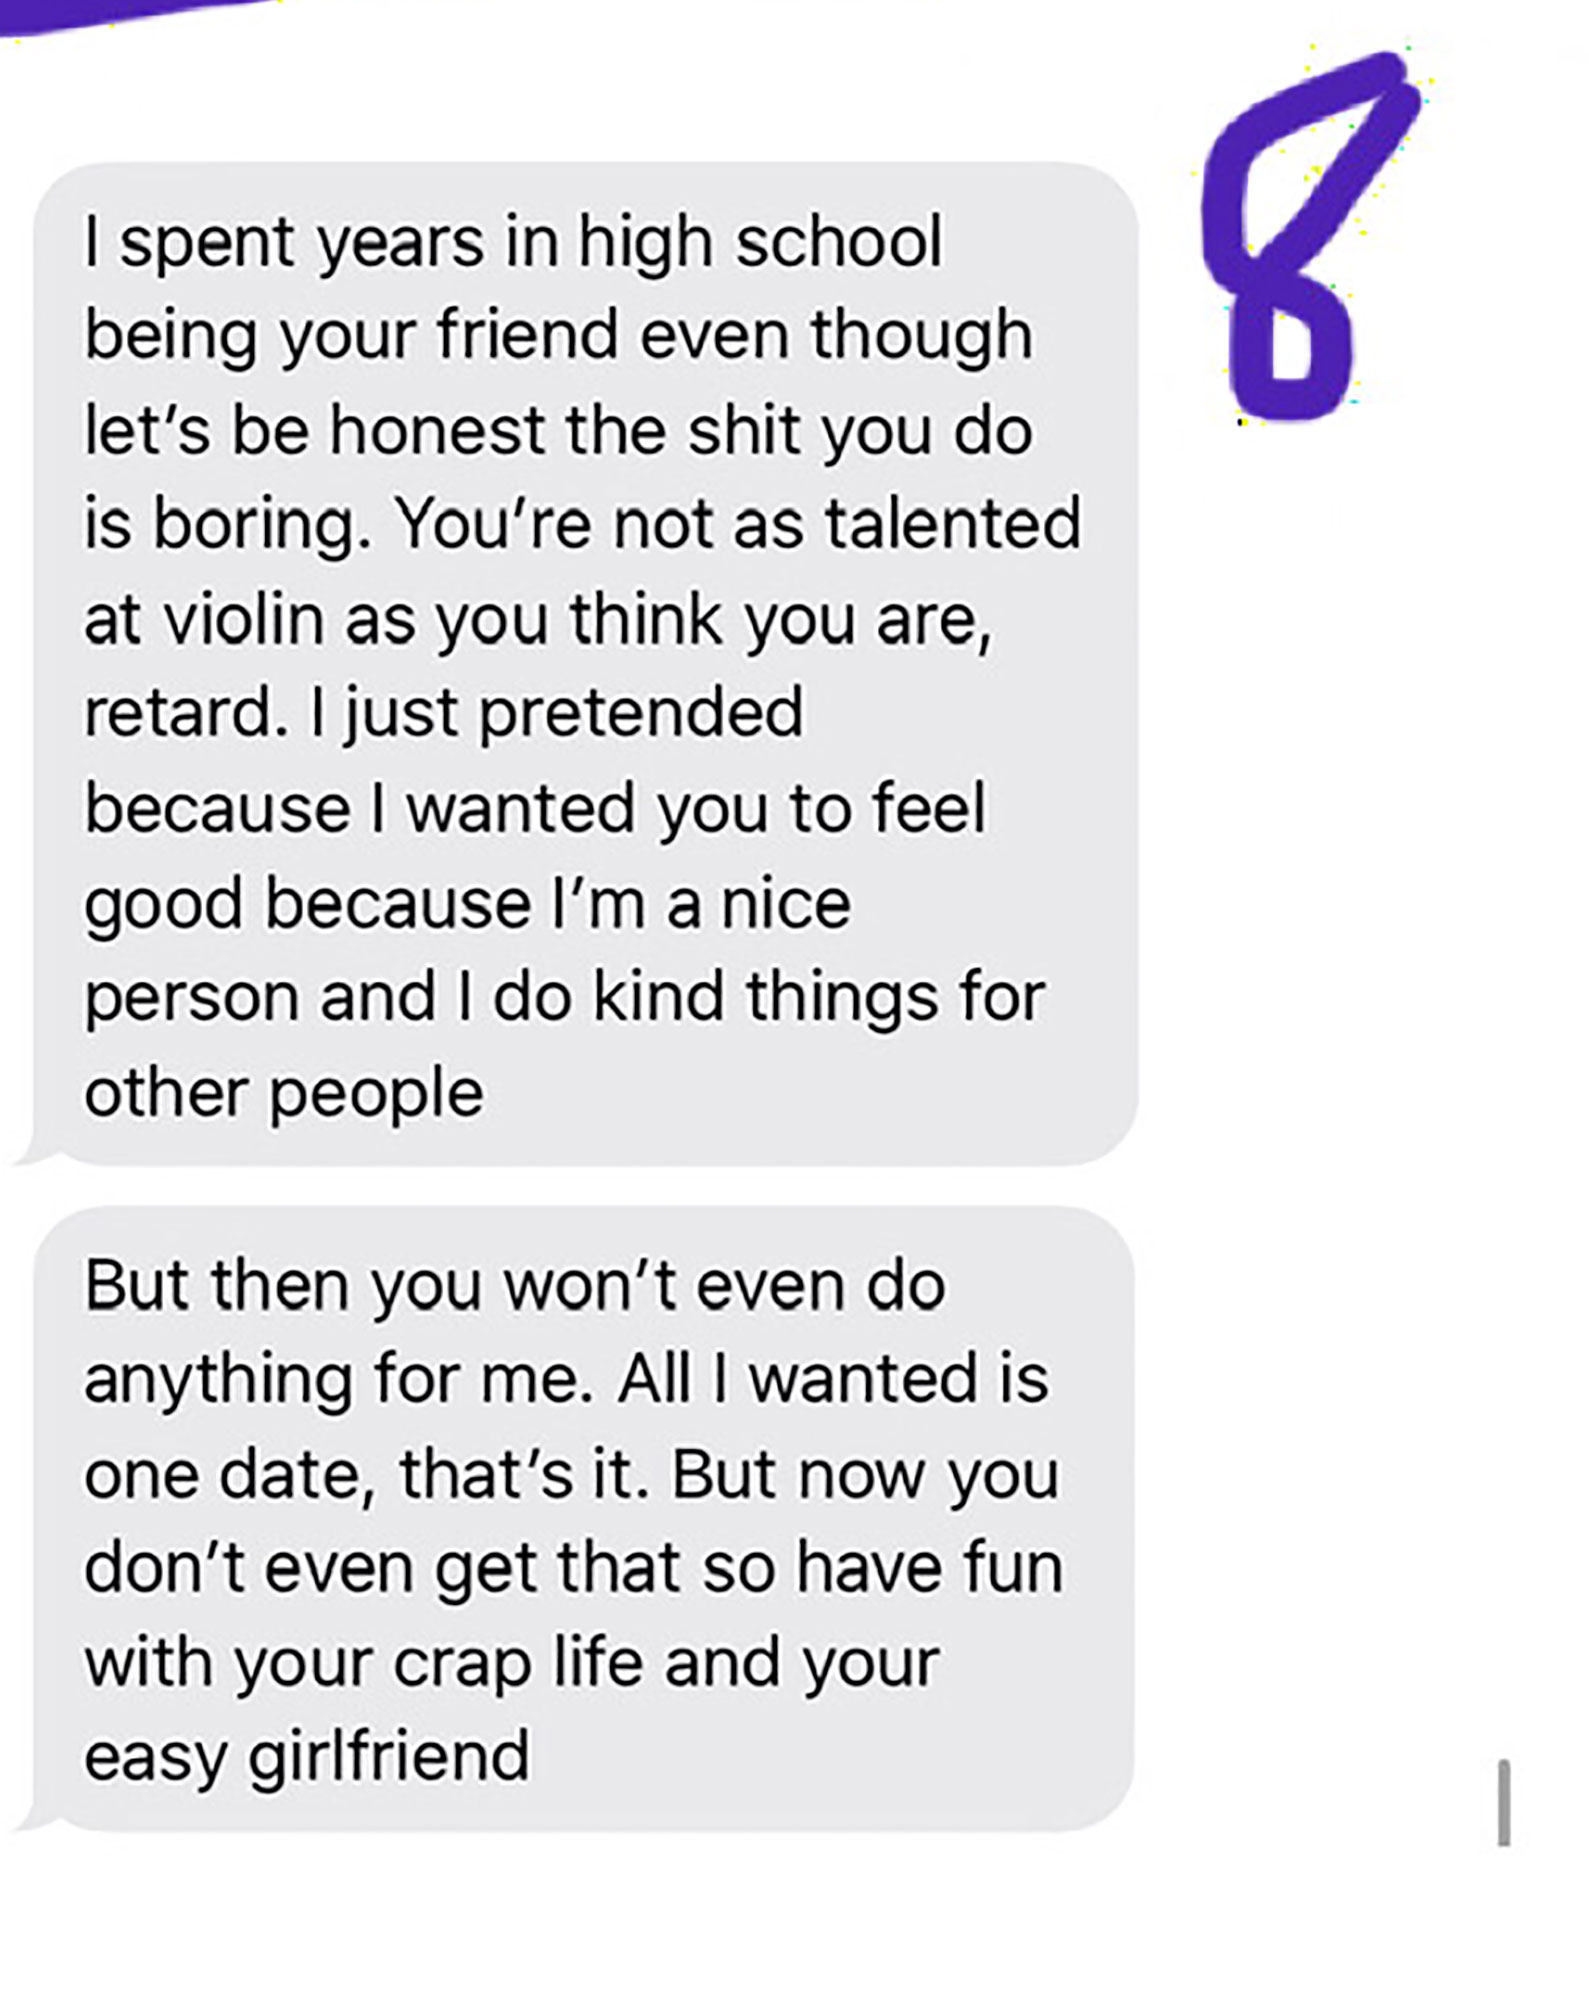 document - I spent years in high school being your friend even though let's be honest the shit you do is boring. You're not as talented at violin as you think you are, retard. I just pretended because I wanted you to feel good because I'm a nice person an